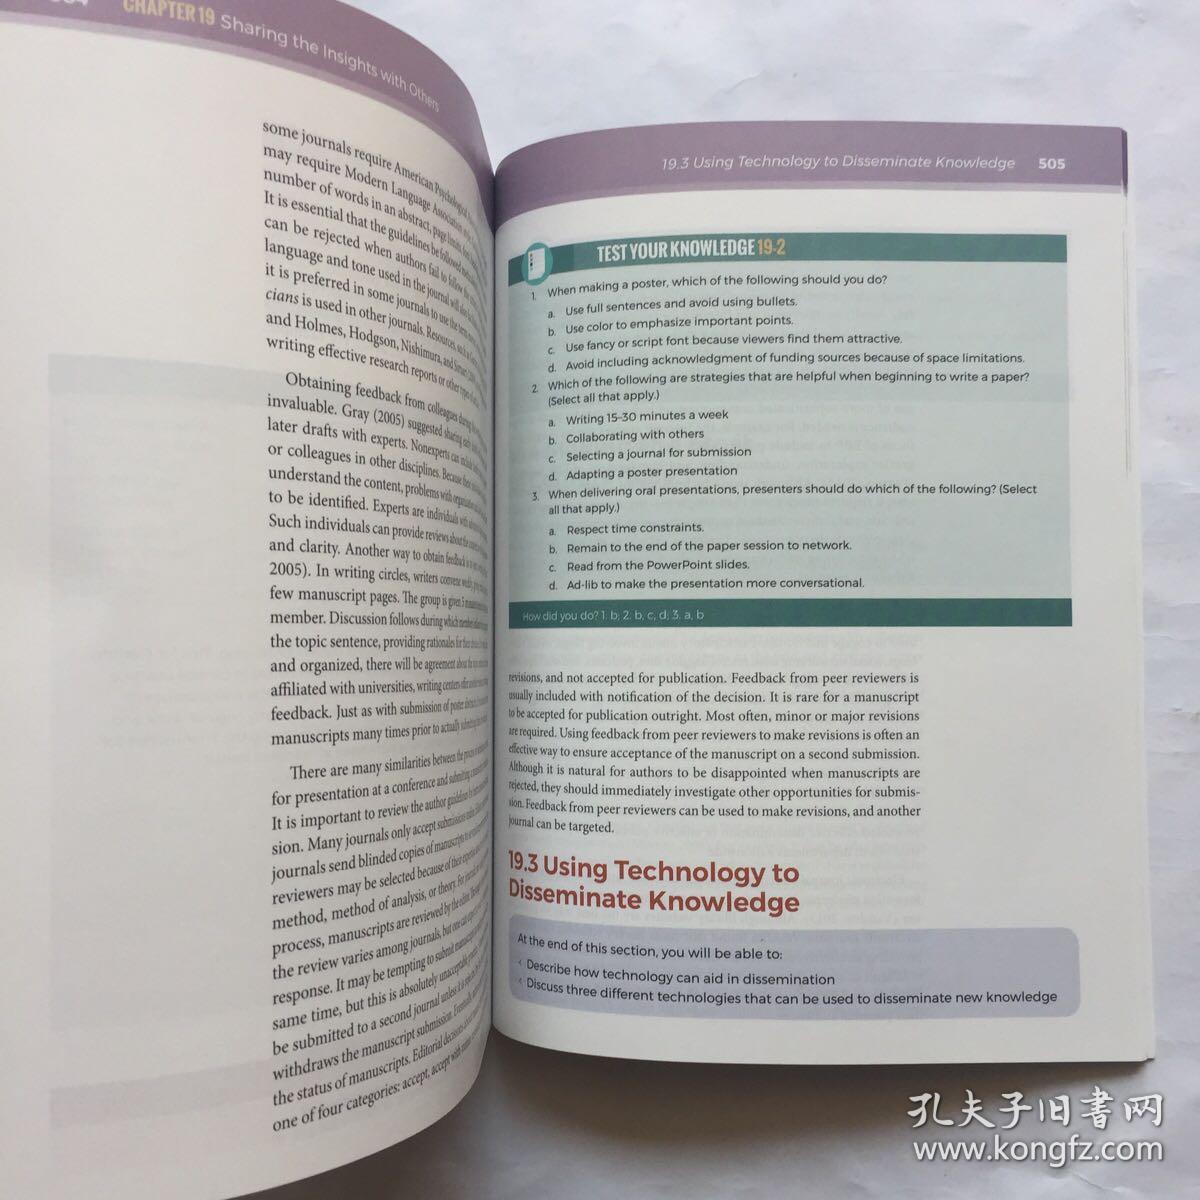 Evidence-Based Practice for Nurses : Appraisal and Application of Research》（Fourth Edition）  护士循证实践：研究的评价与应用》（第四版）